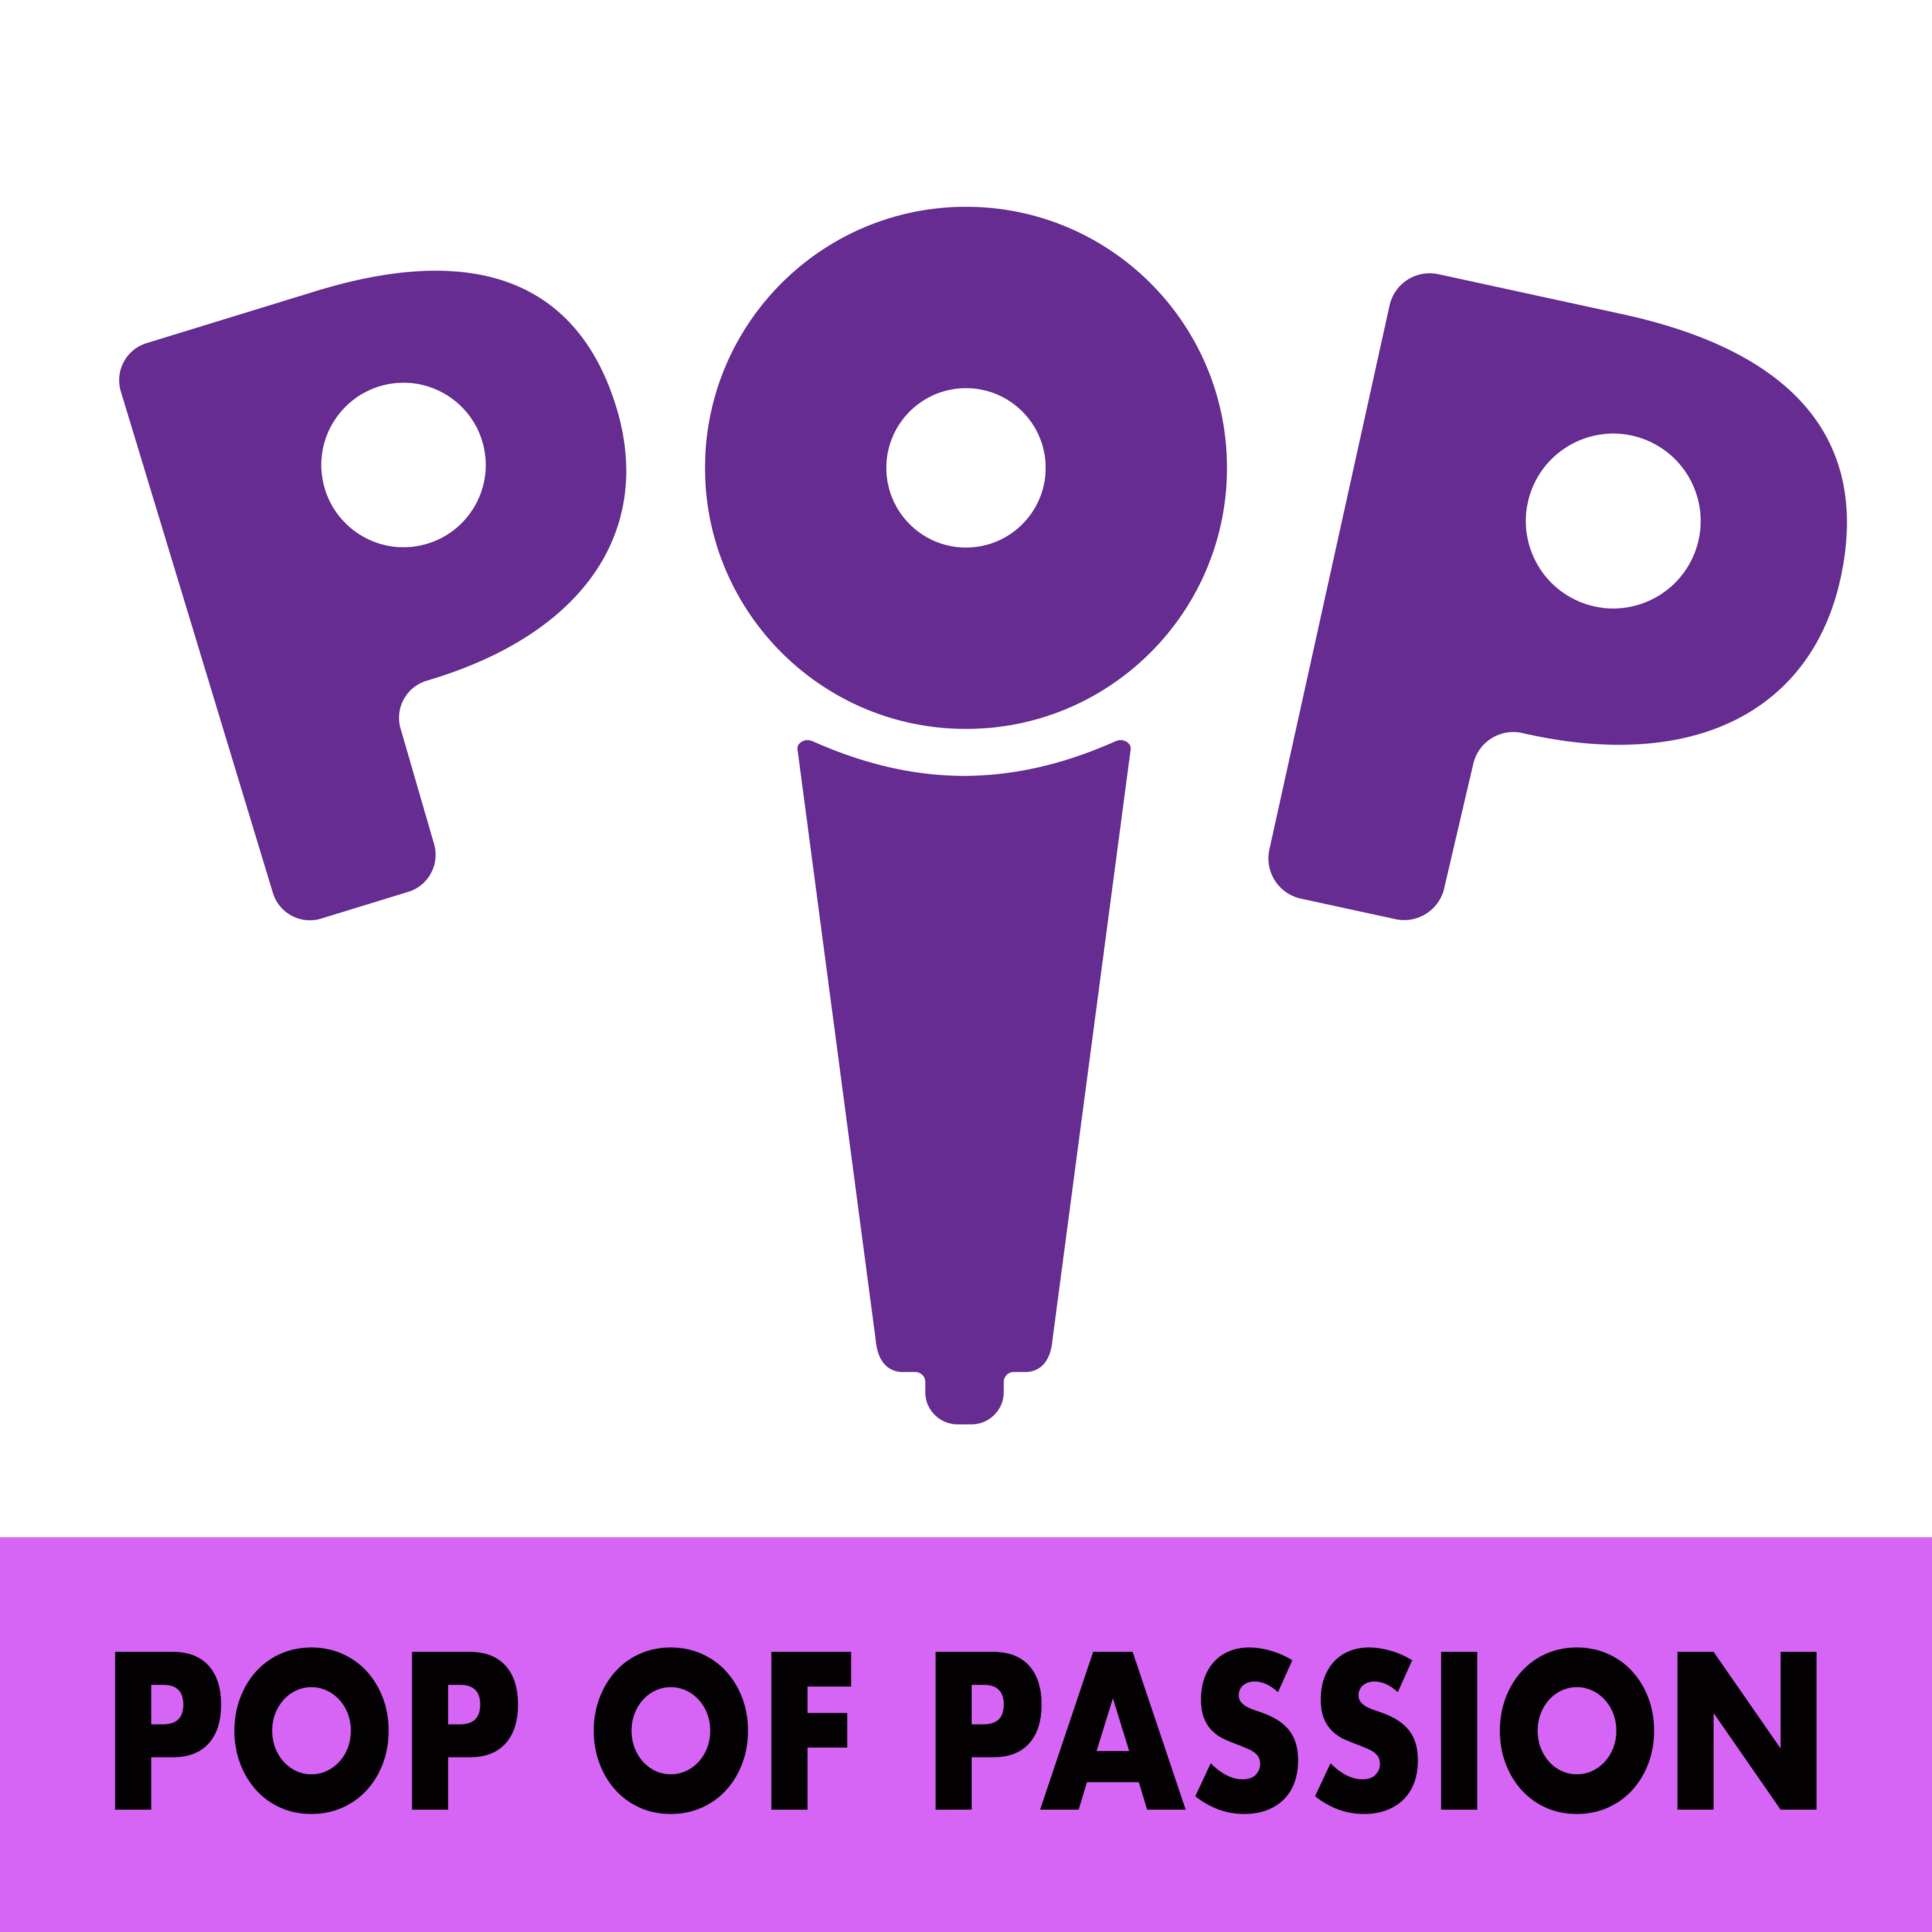 Pop of Passion Trailer